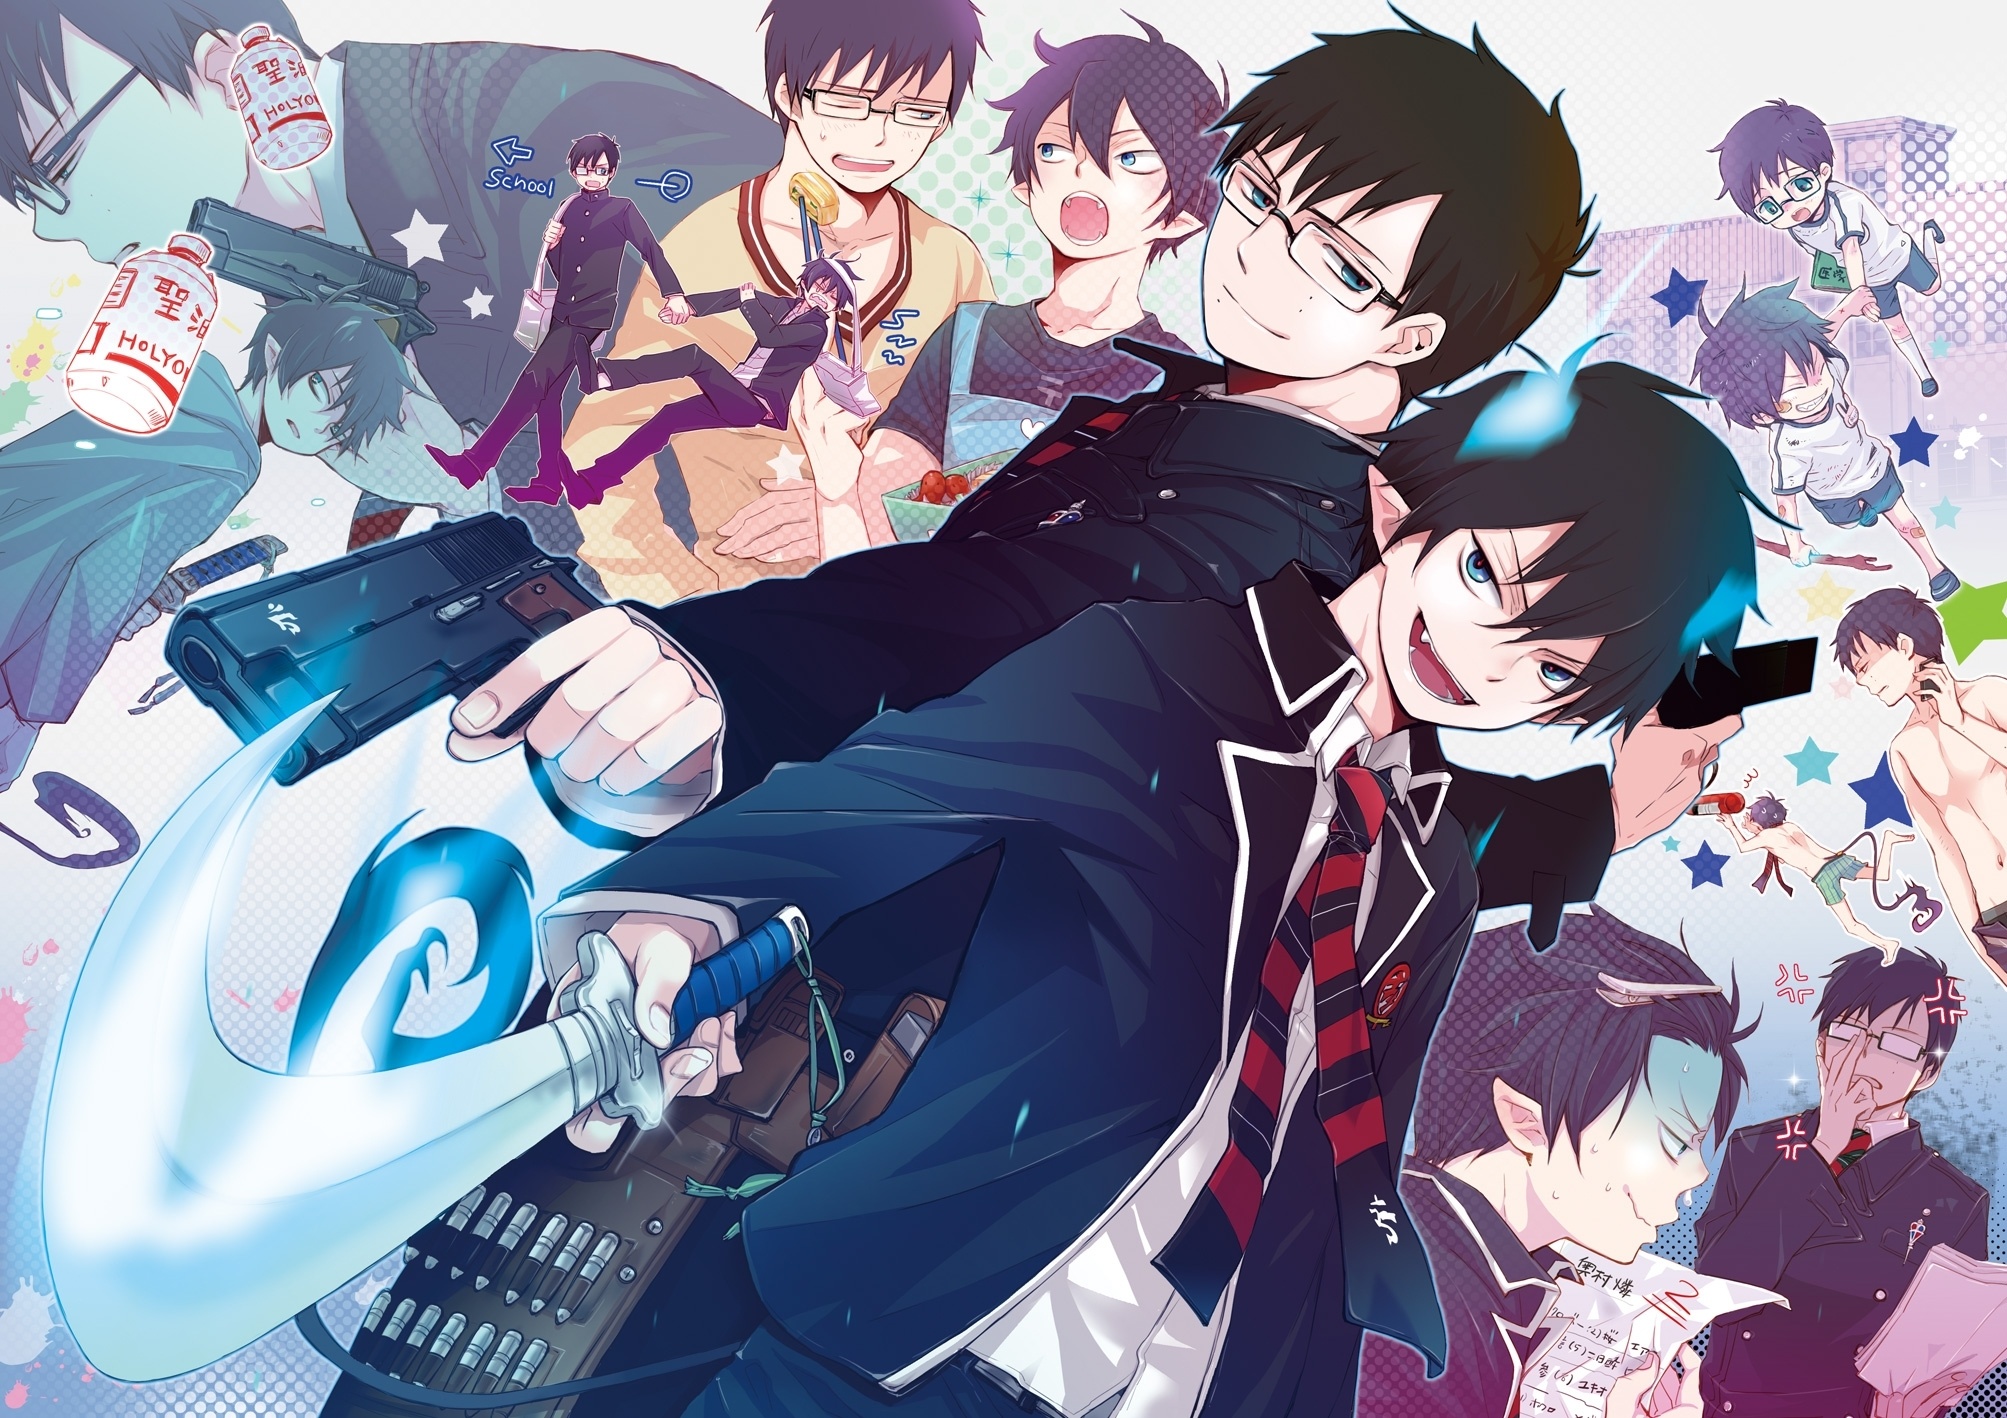 Blue Exorcist: One of the best-selling manga of the same name by Kazue Kato. 2010x1420 HD Wallpaper.